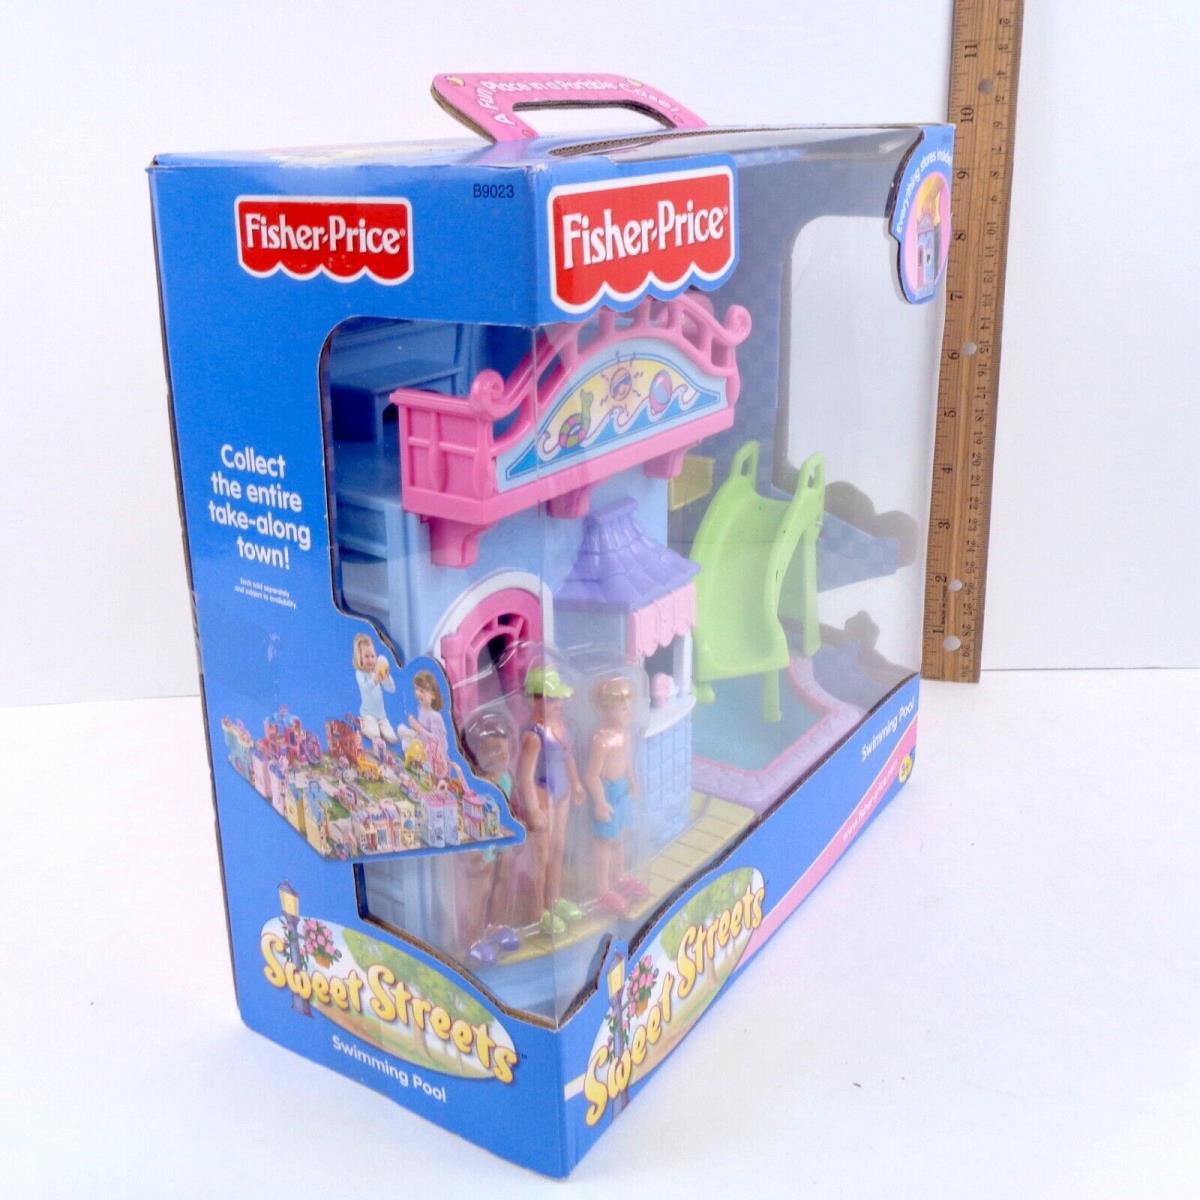 2003 Fisher Price Sweet Streets Swimming Pool Doll Playset